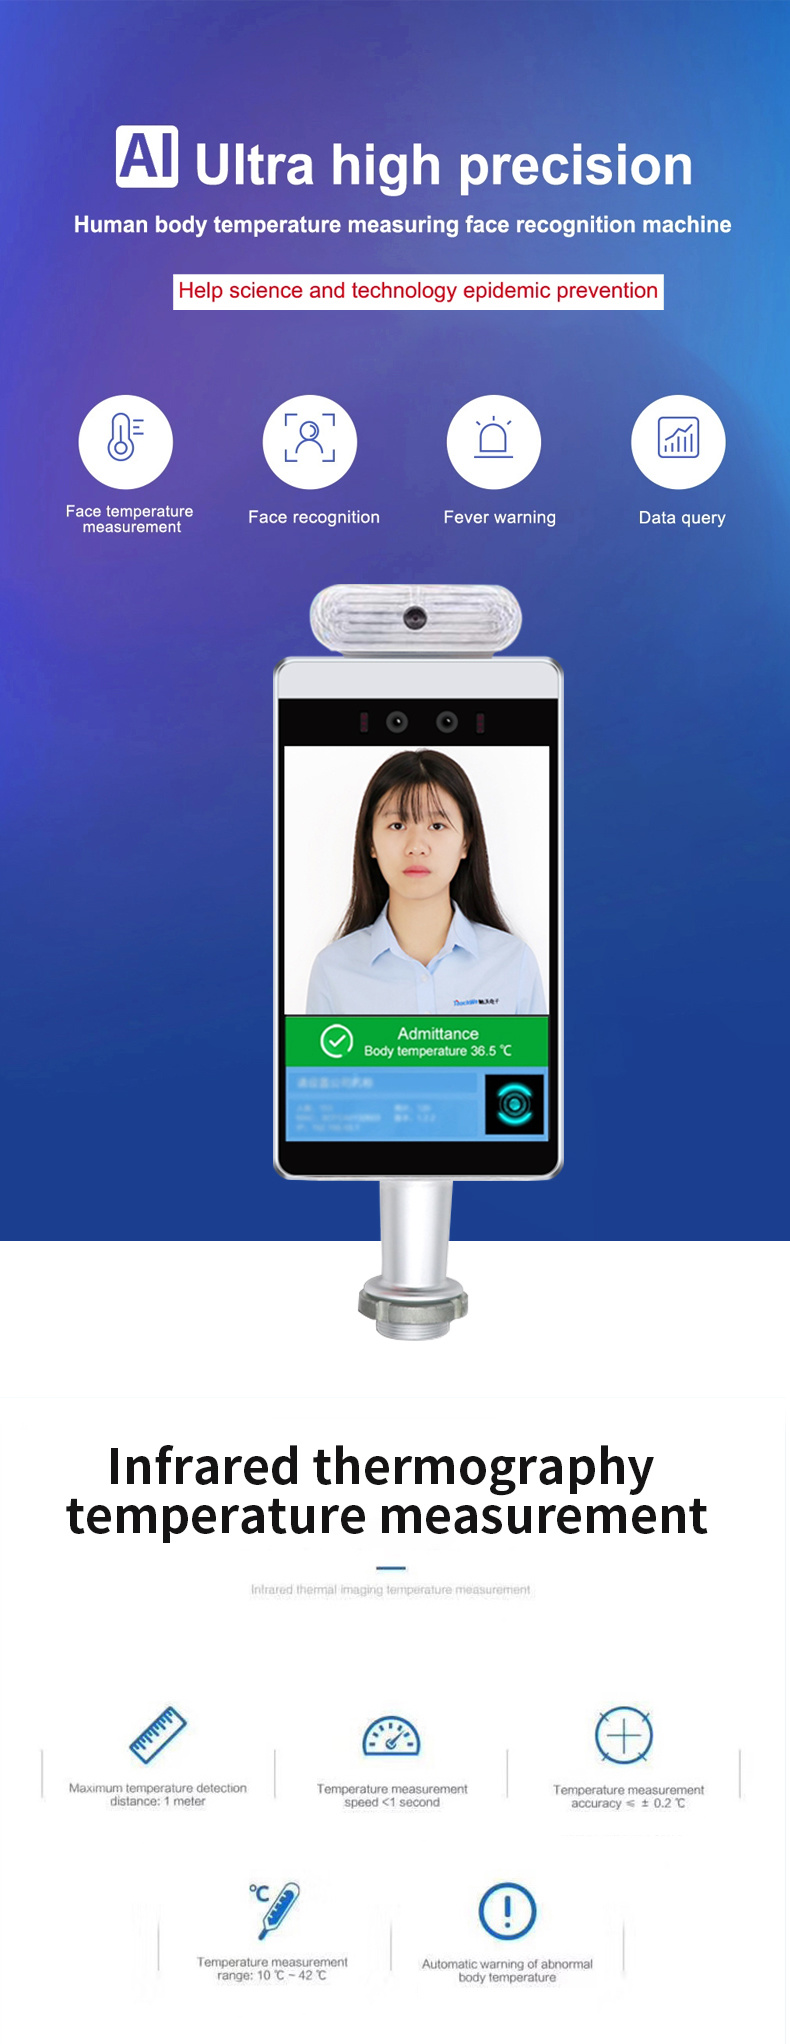 8 Inch Biometric Camera in Face Recognition Facial Recognition